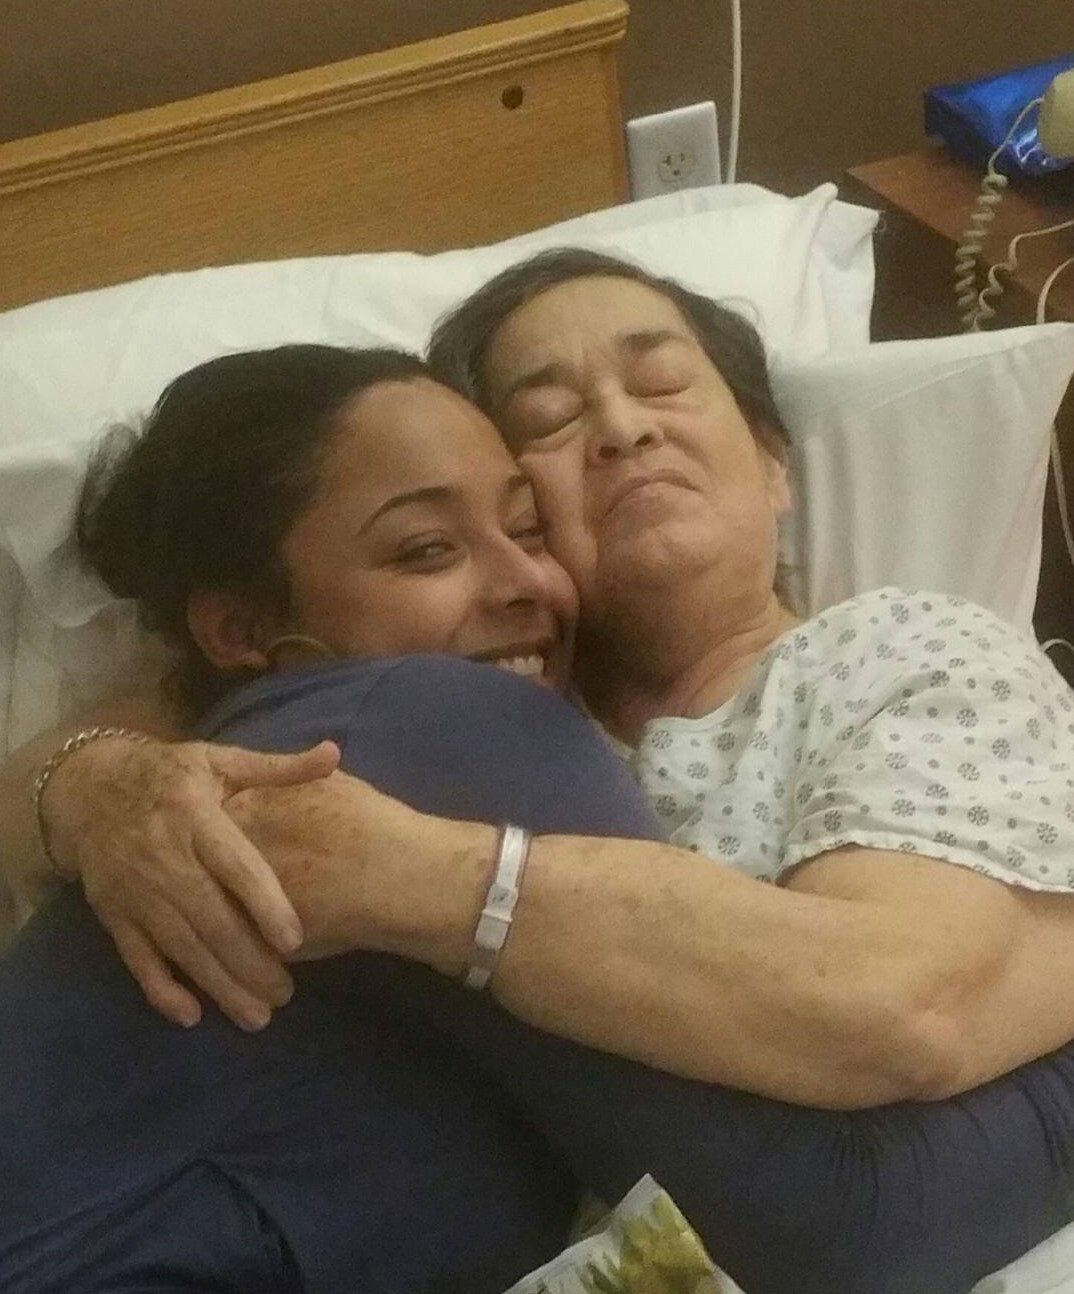 An image of Rebekah smiling wide and hugging her grandmother, her Tata for whom she does caregiving, who is in a hospital gown in bed.